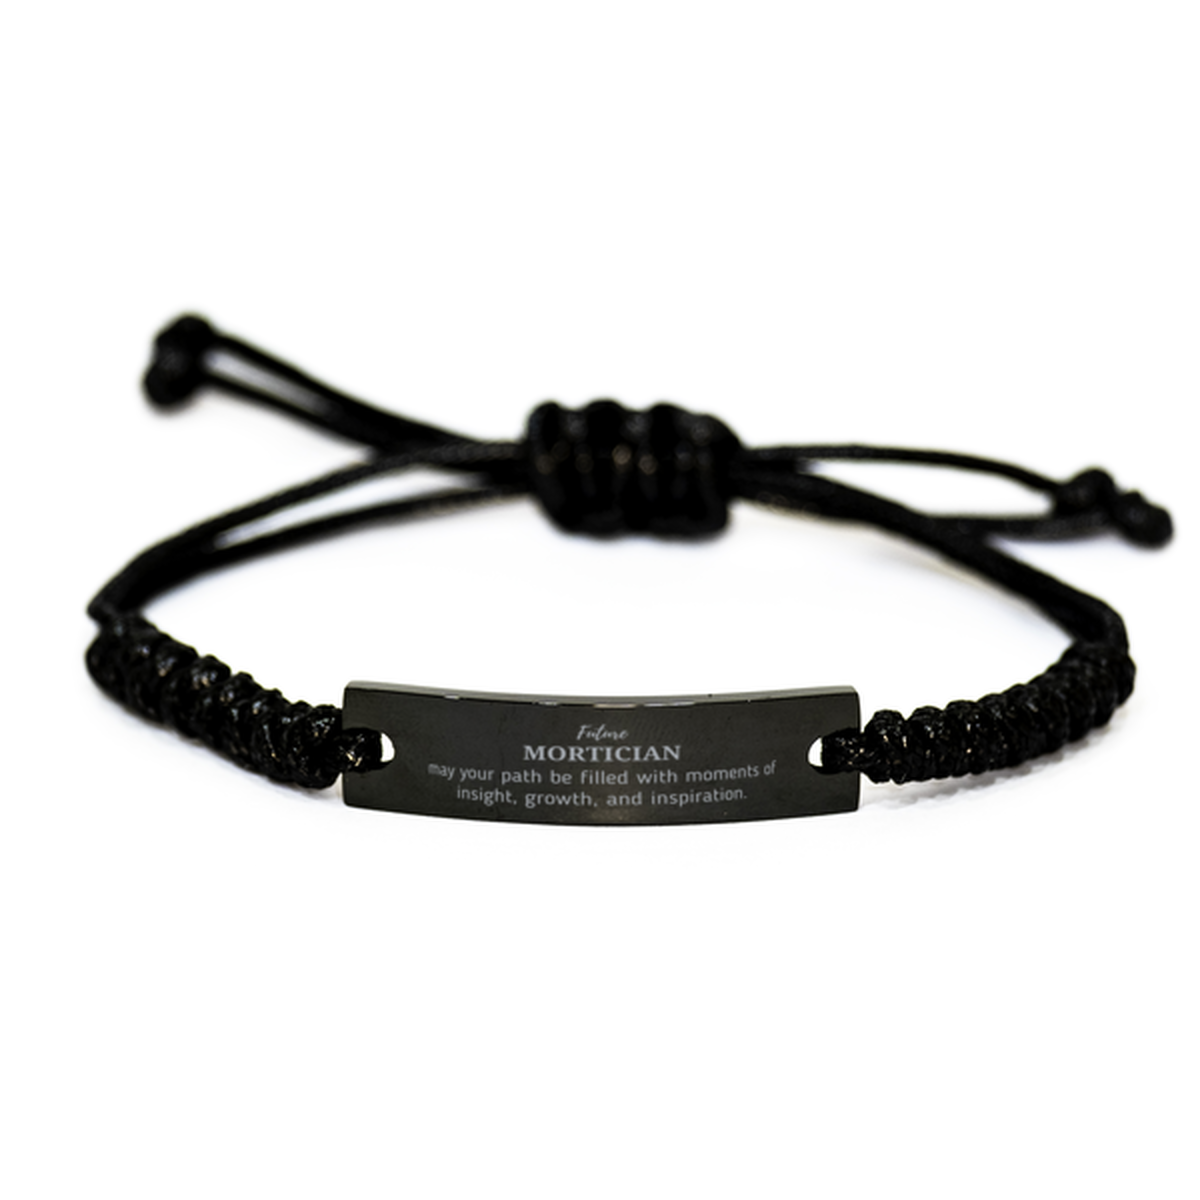 Future Mortician Gifts, May your path be filled with moments of insight, Graduation Gifts for New Mortician, Christmas Unique Black Rope Bracelet For Men, Women, Friends